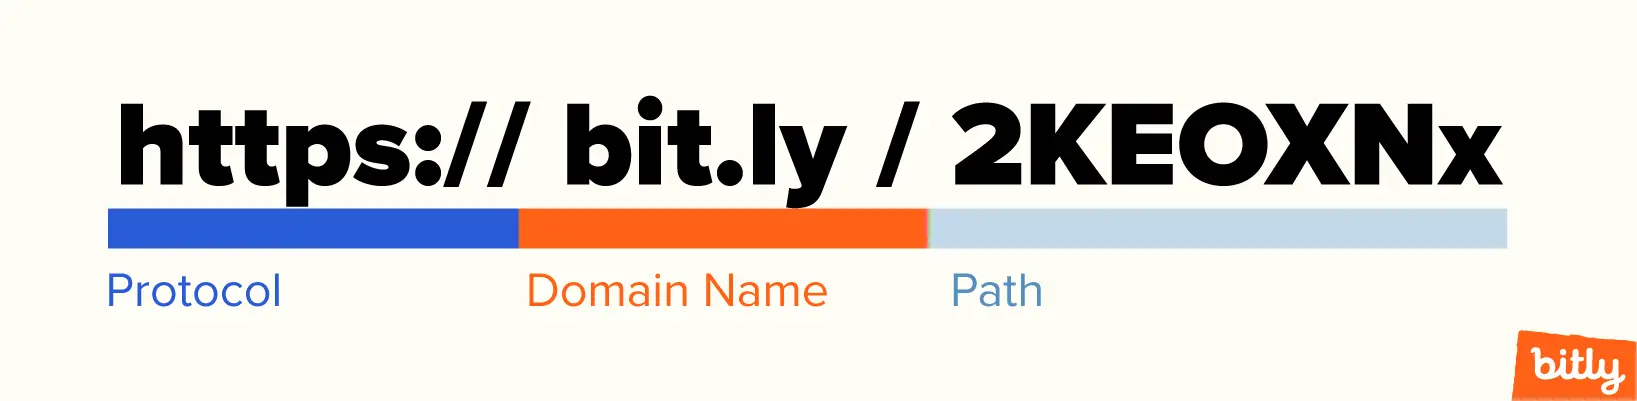 An example of a link, highlighting the sections for protocol, domain name, and path.